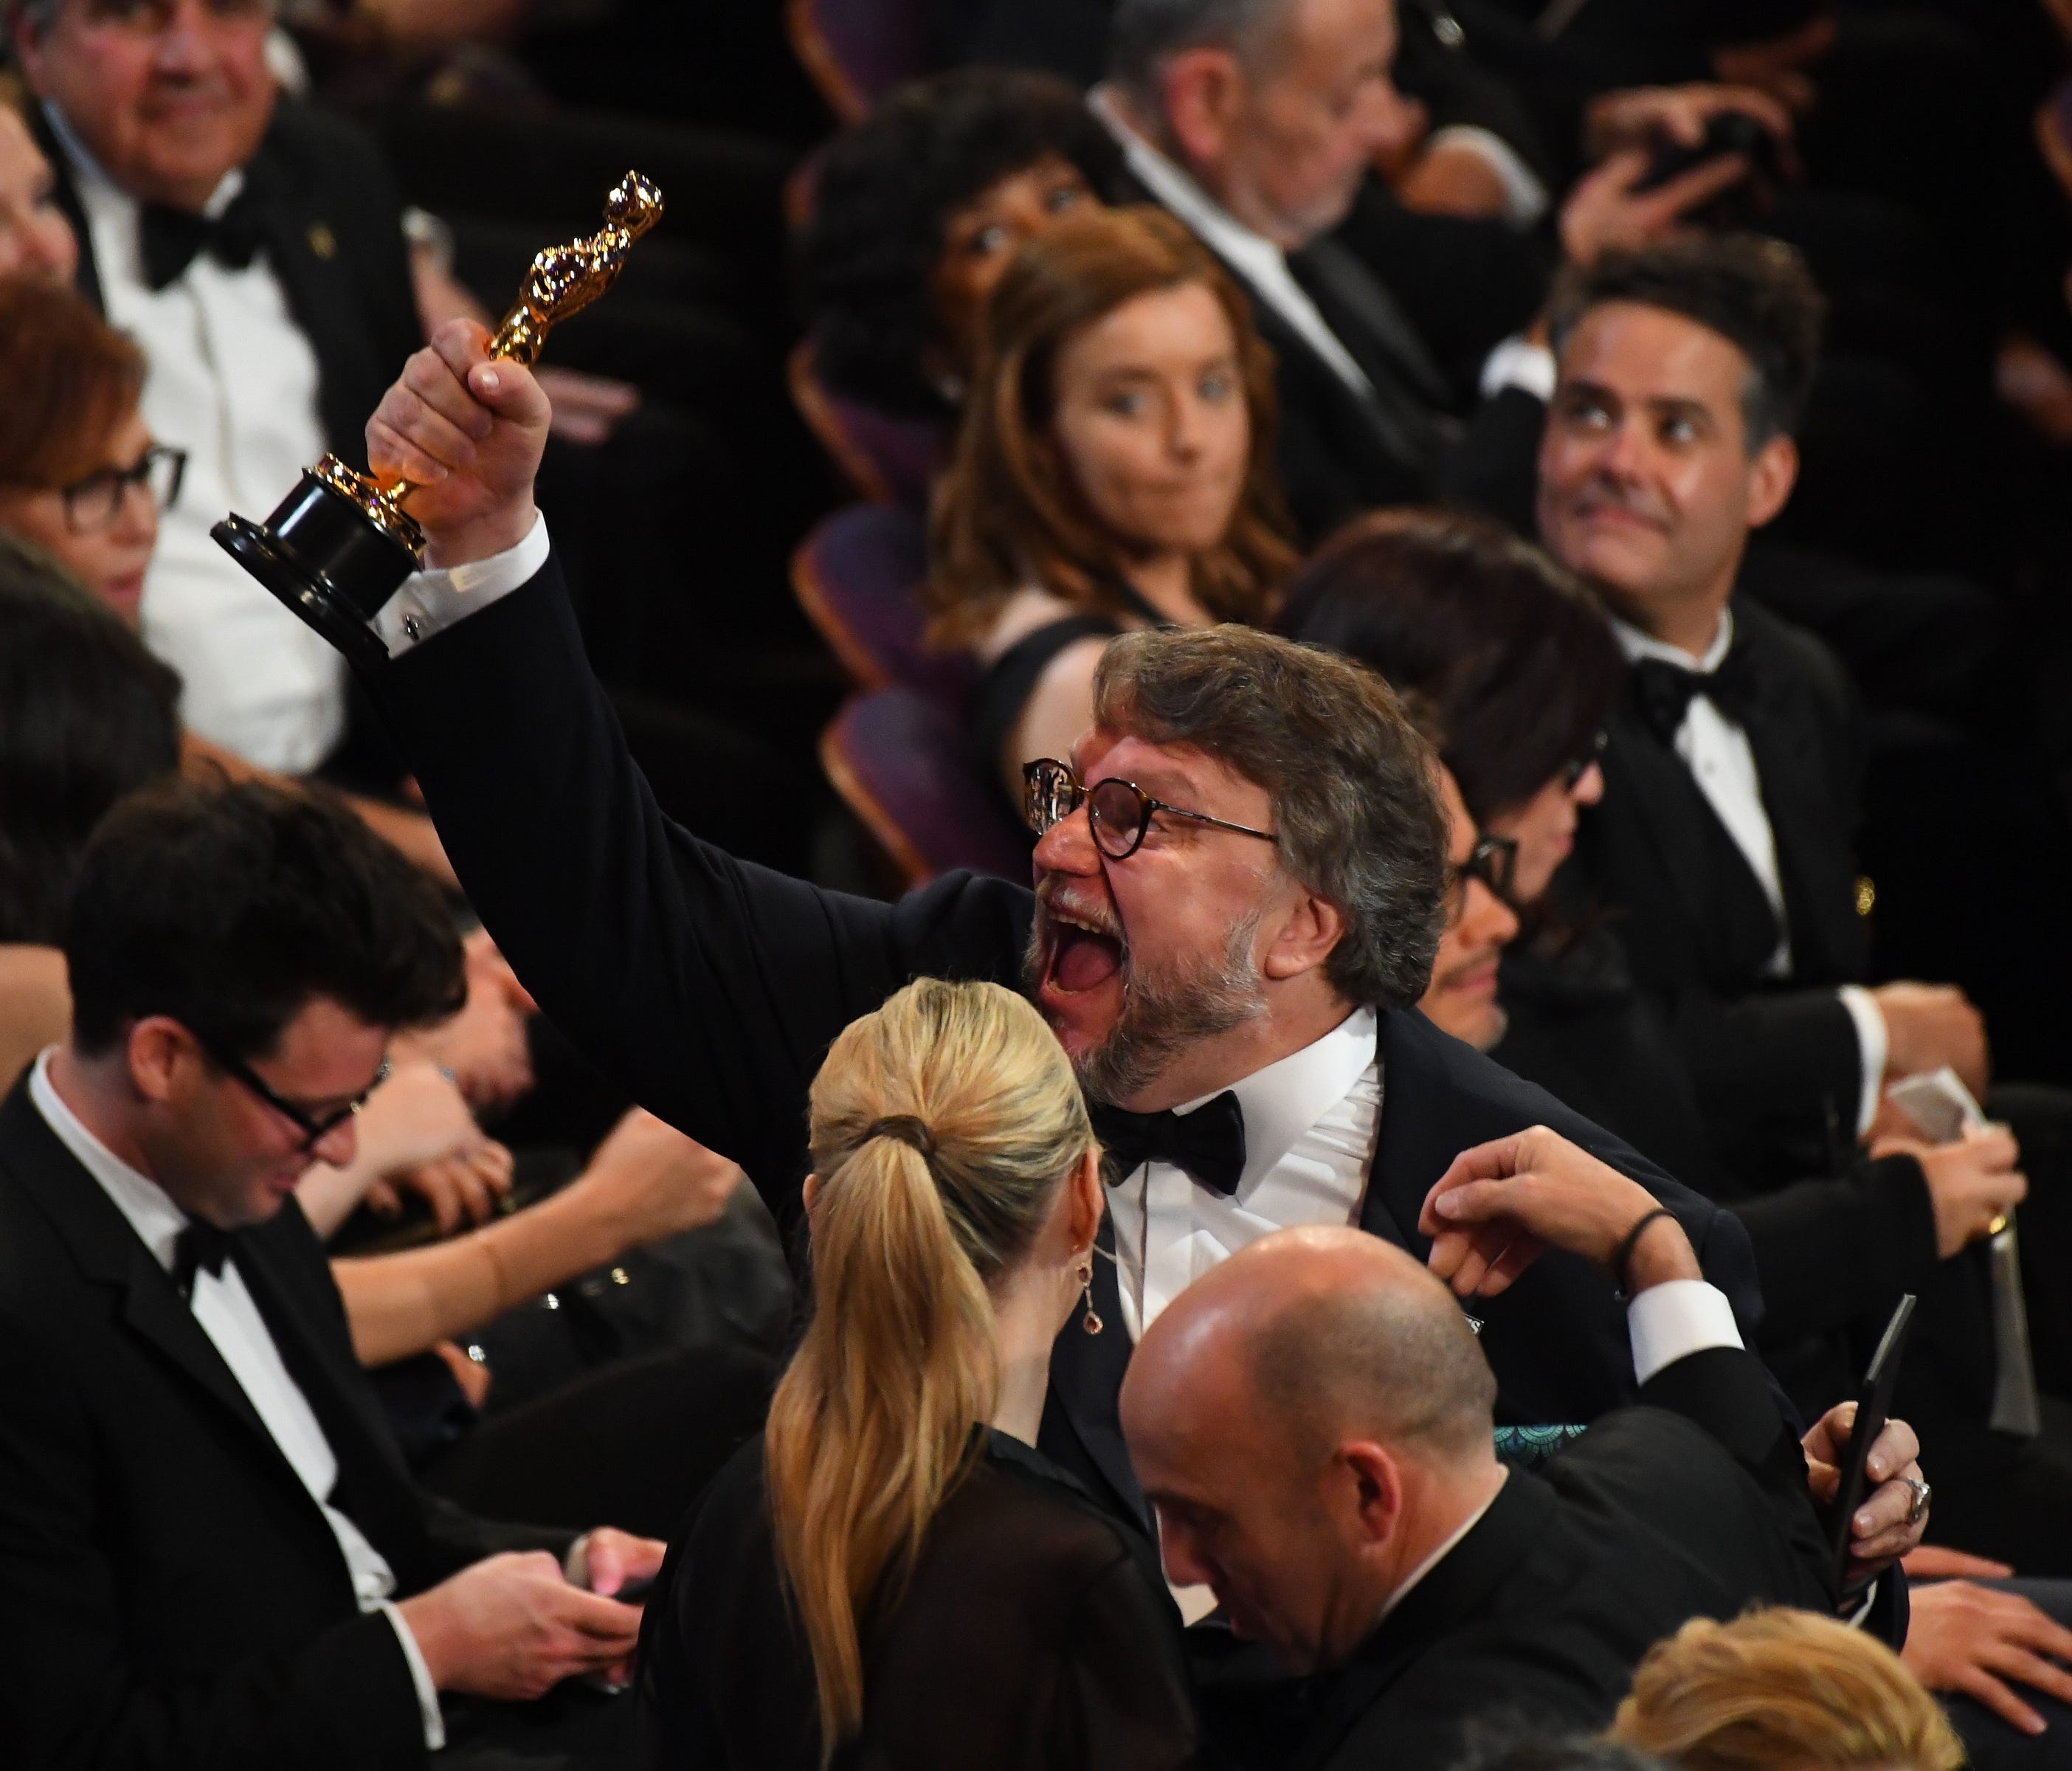 Guillermo del Toro showed off his first Oscar of two at Sunday's Academy Awards.